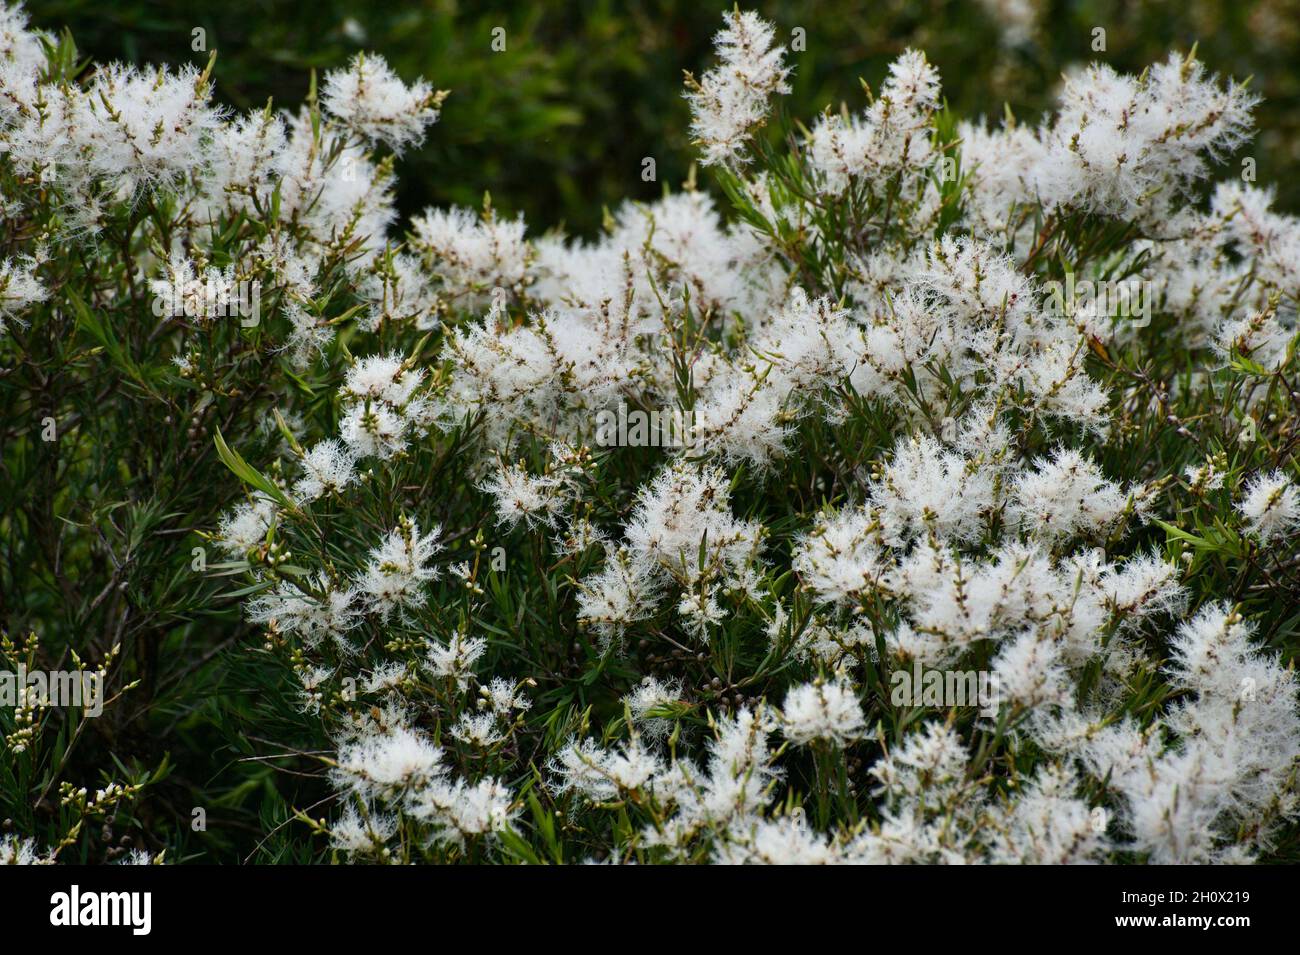 This Melaleuca Linarifolia is known as Snow In Summer. The fluffy white blossom covers the tree in 'snow'. Common street trees in Victoria, Australia. Stock Photo